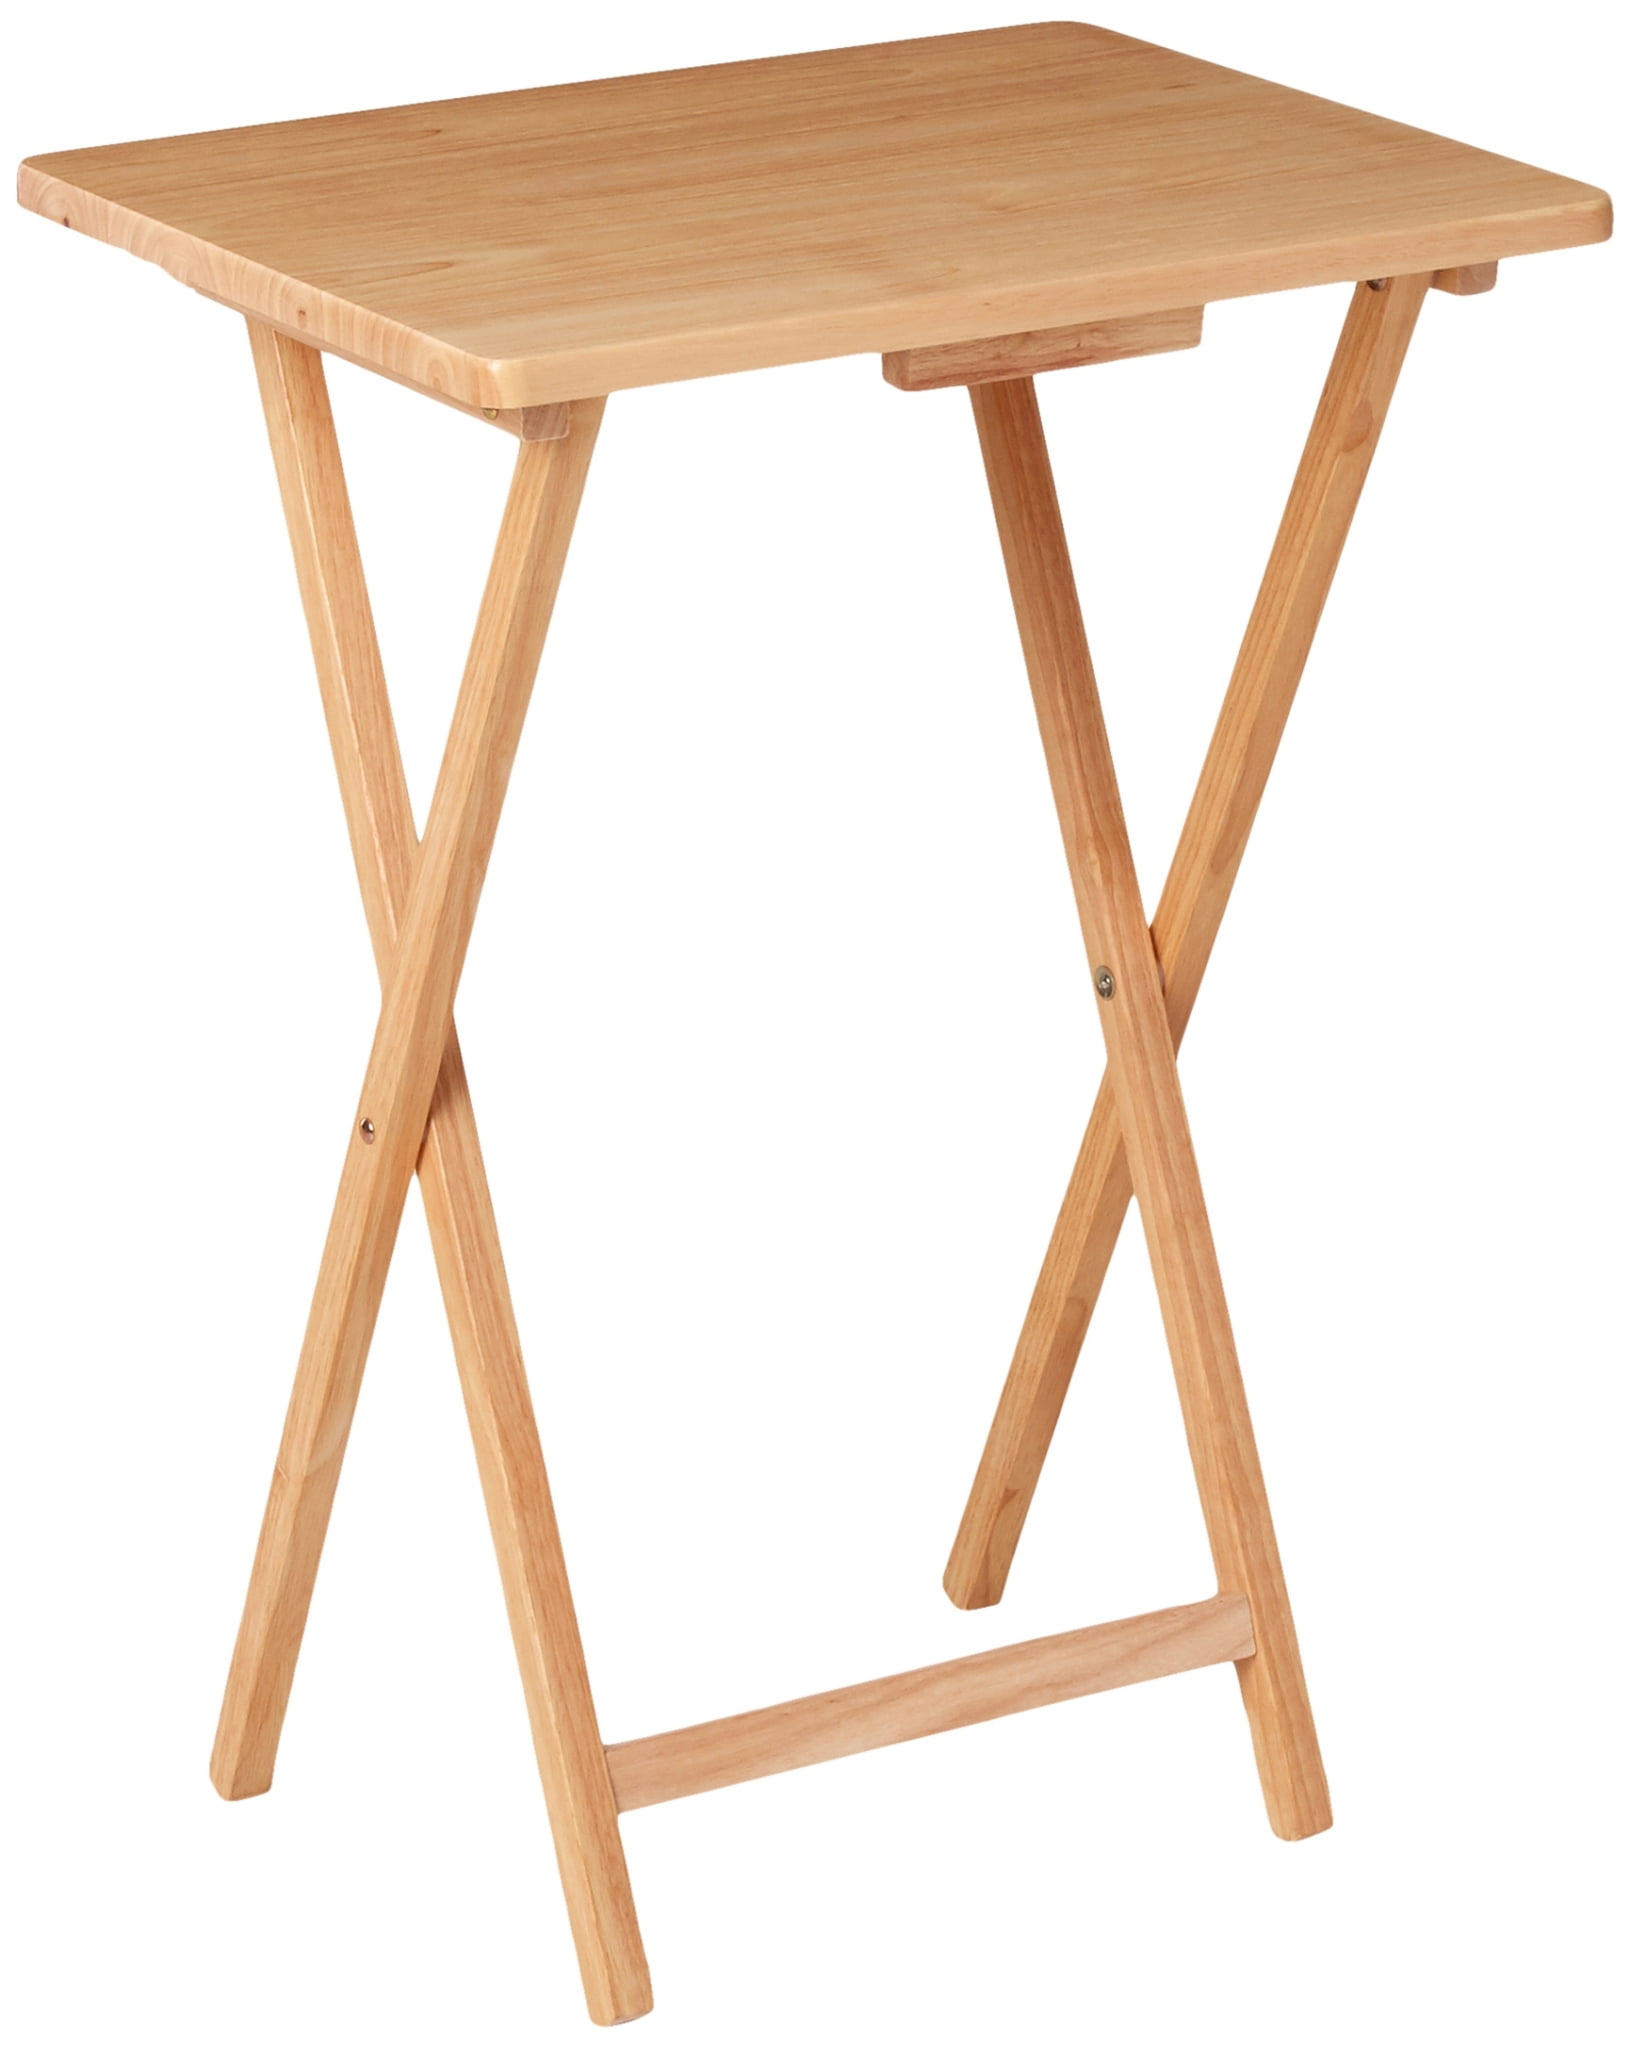 Mainstays Indoor Single Folding TV Tray Table Natural L 19 x W 15 x H 26  inches.